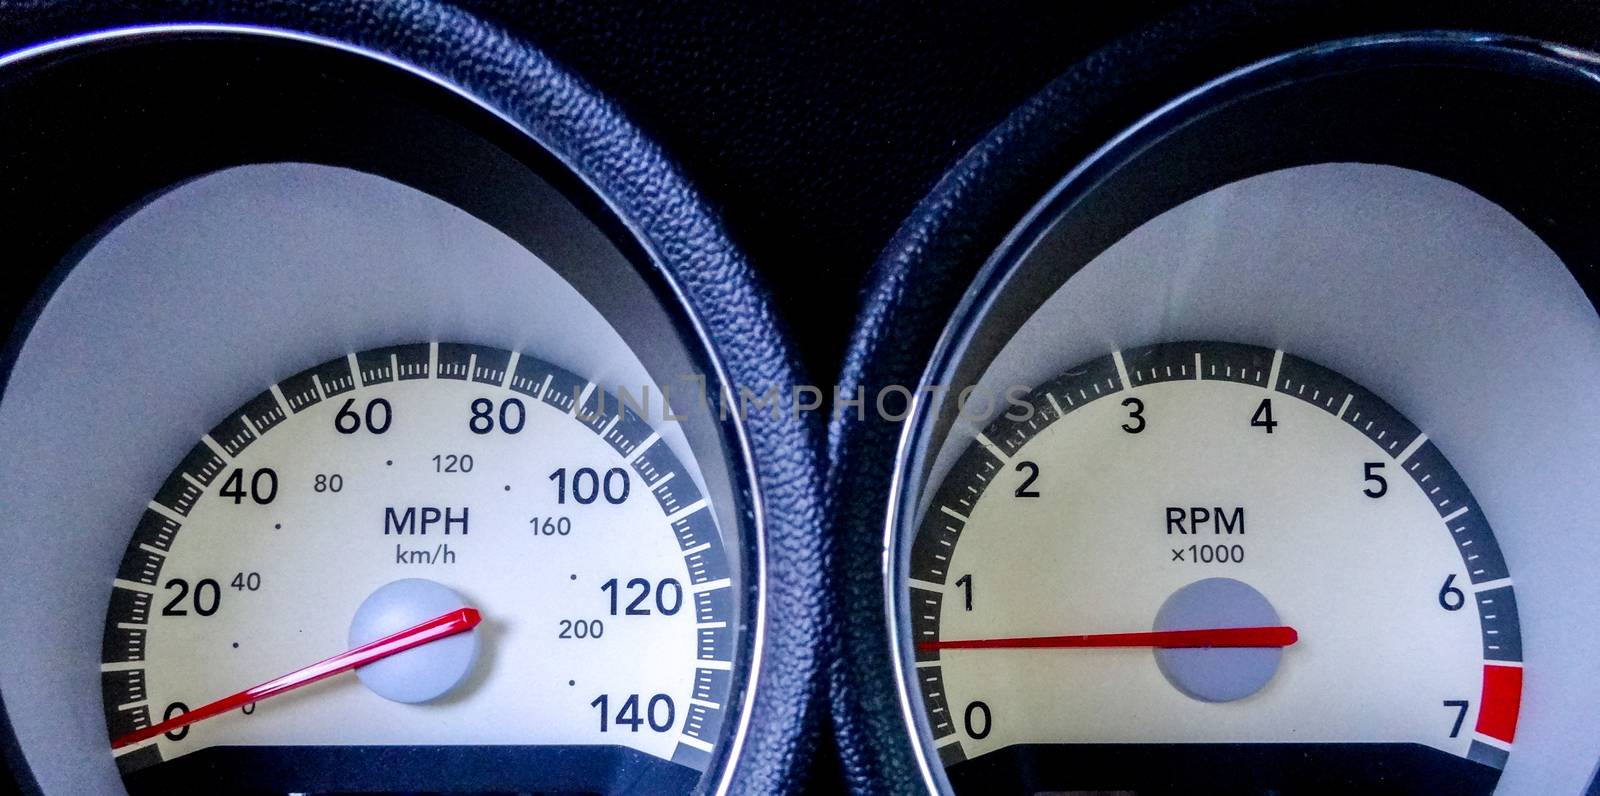 modern car speed meter, racing style by digidreamgrafix